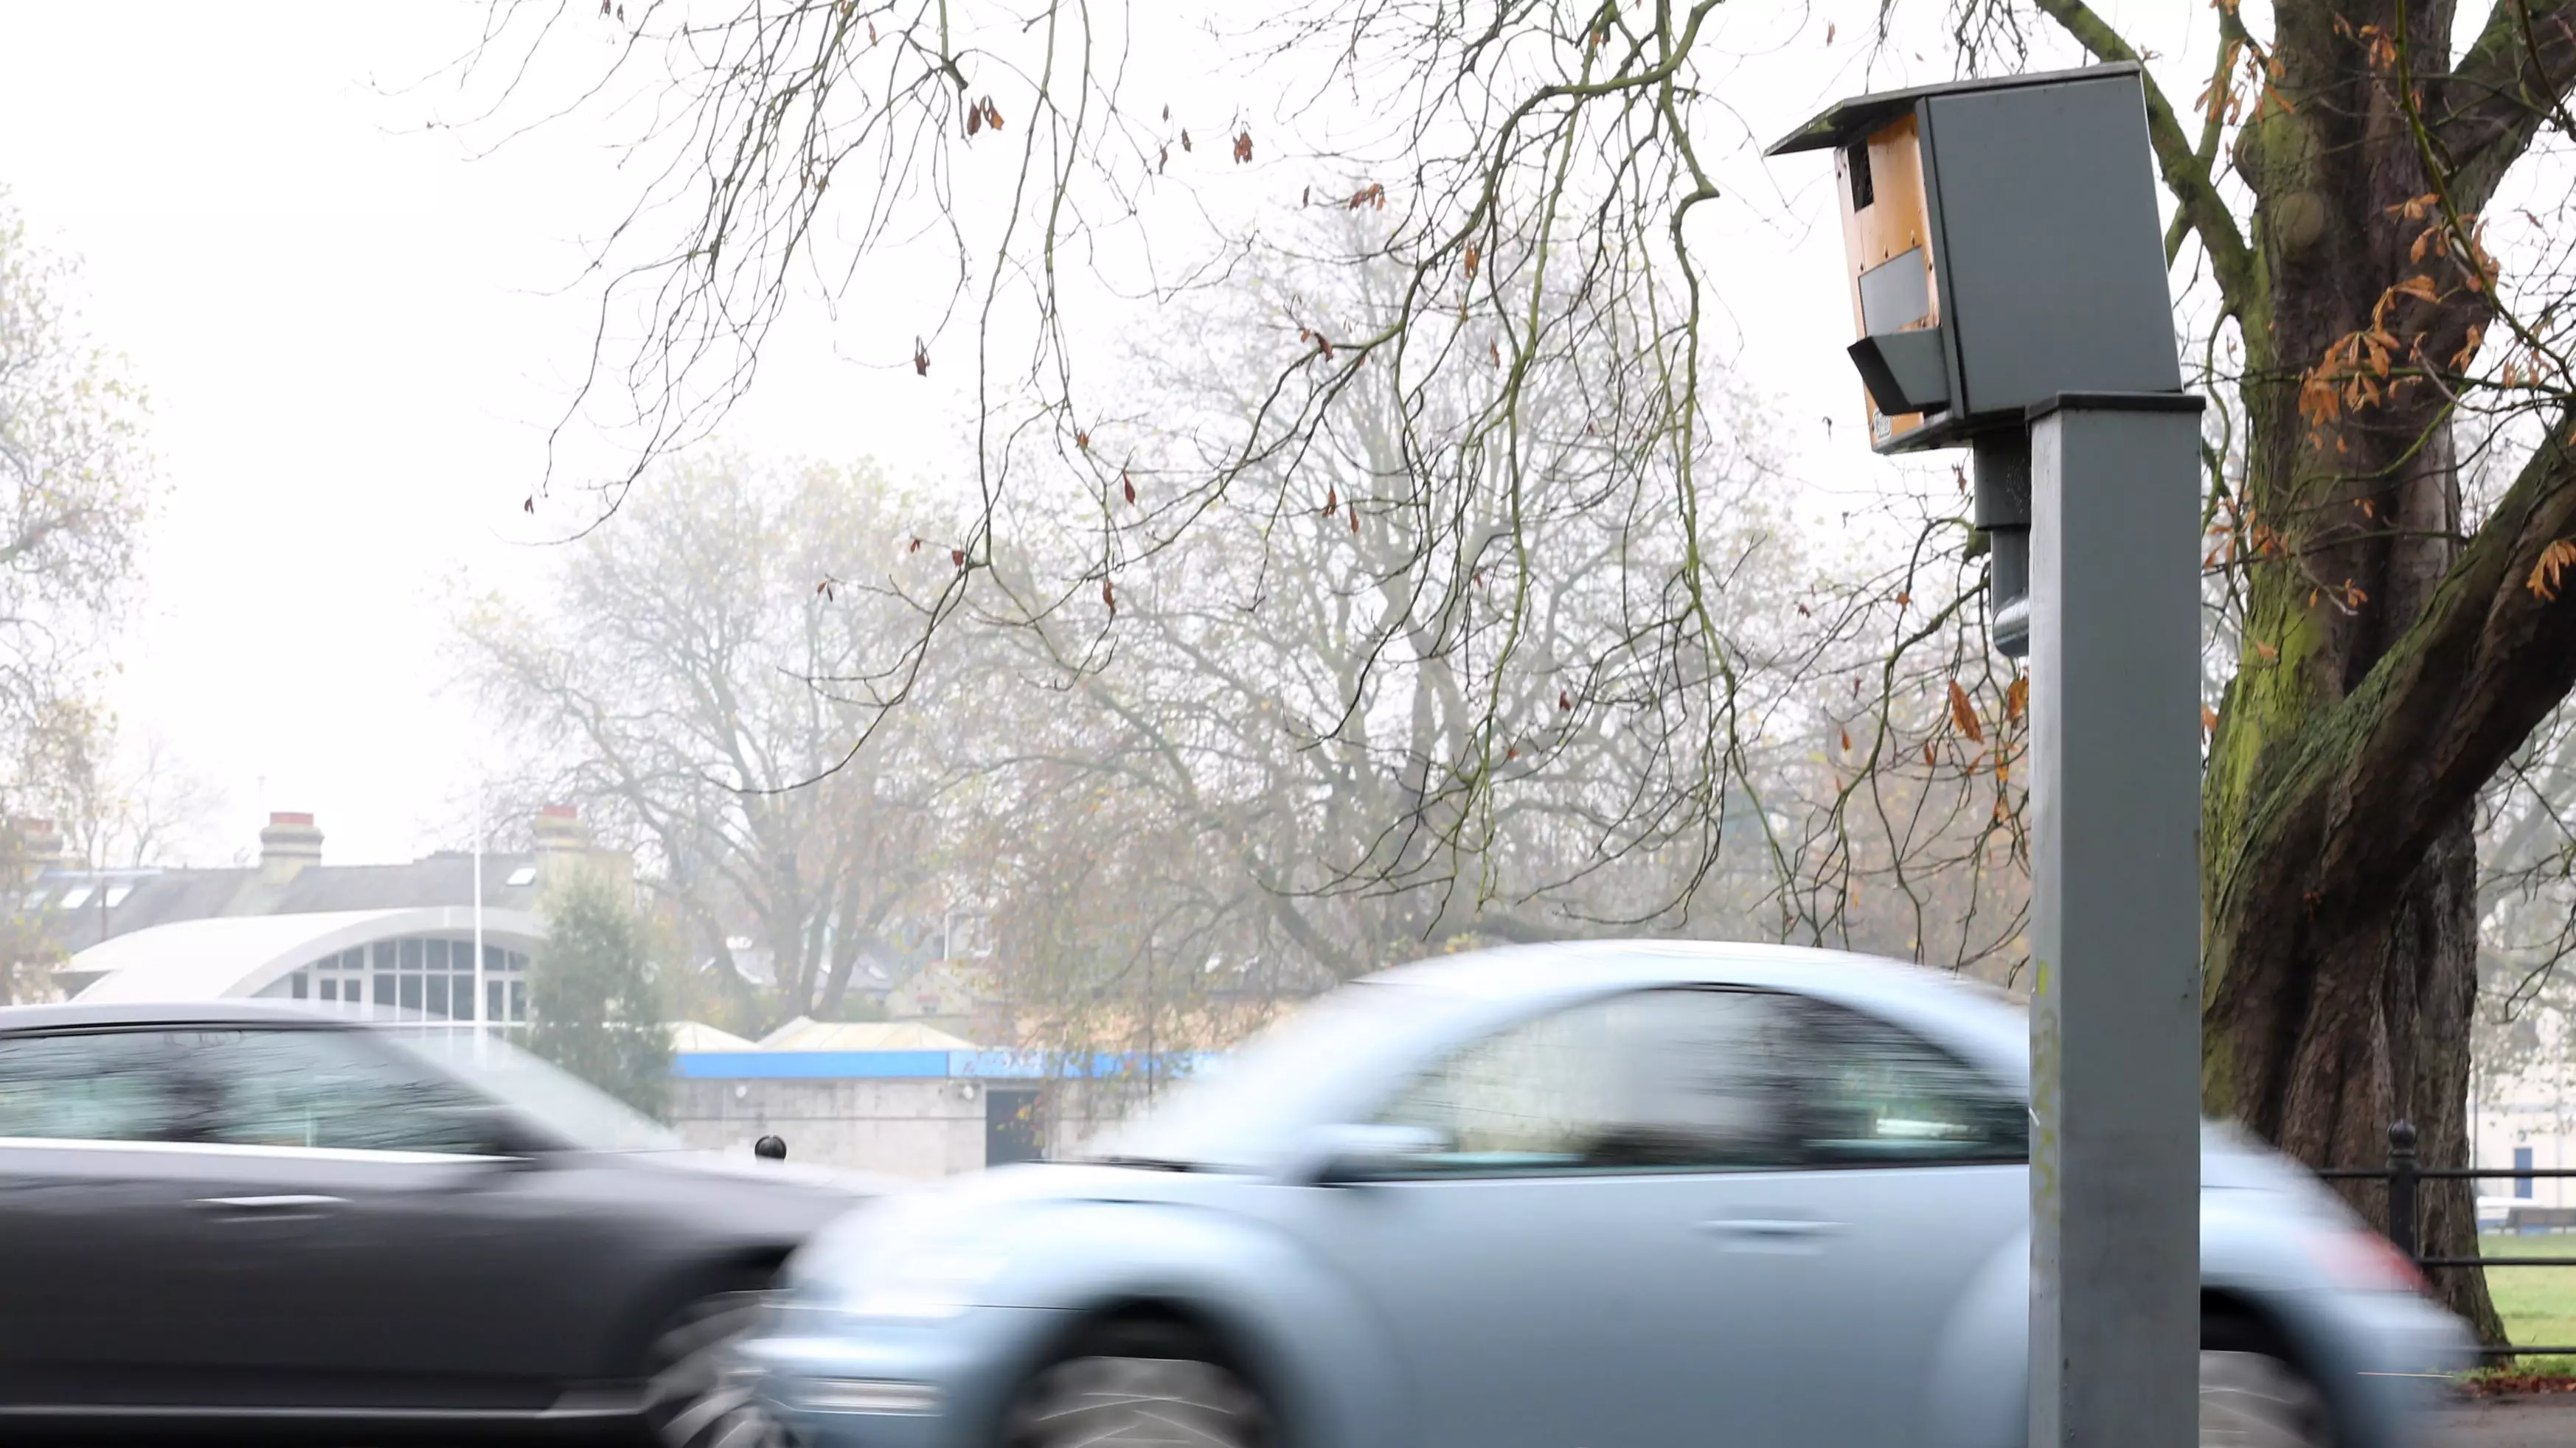 Half Of Speed Cameras In The UK Are Not Switched On 